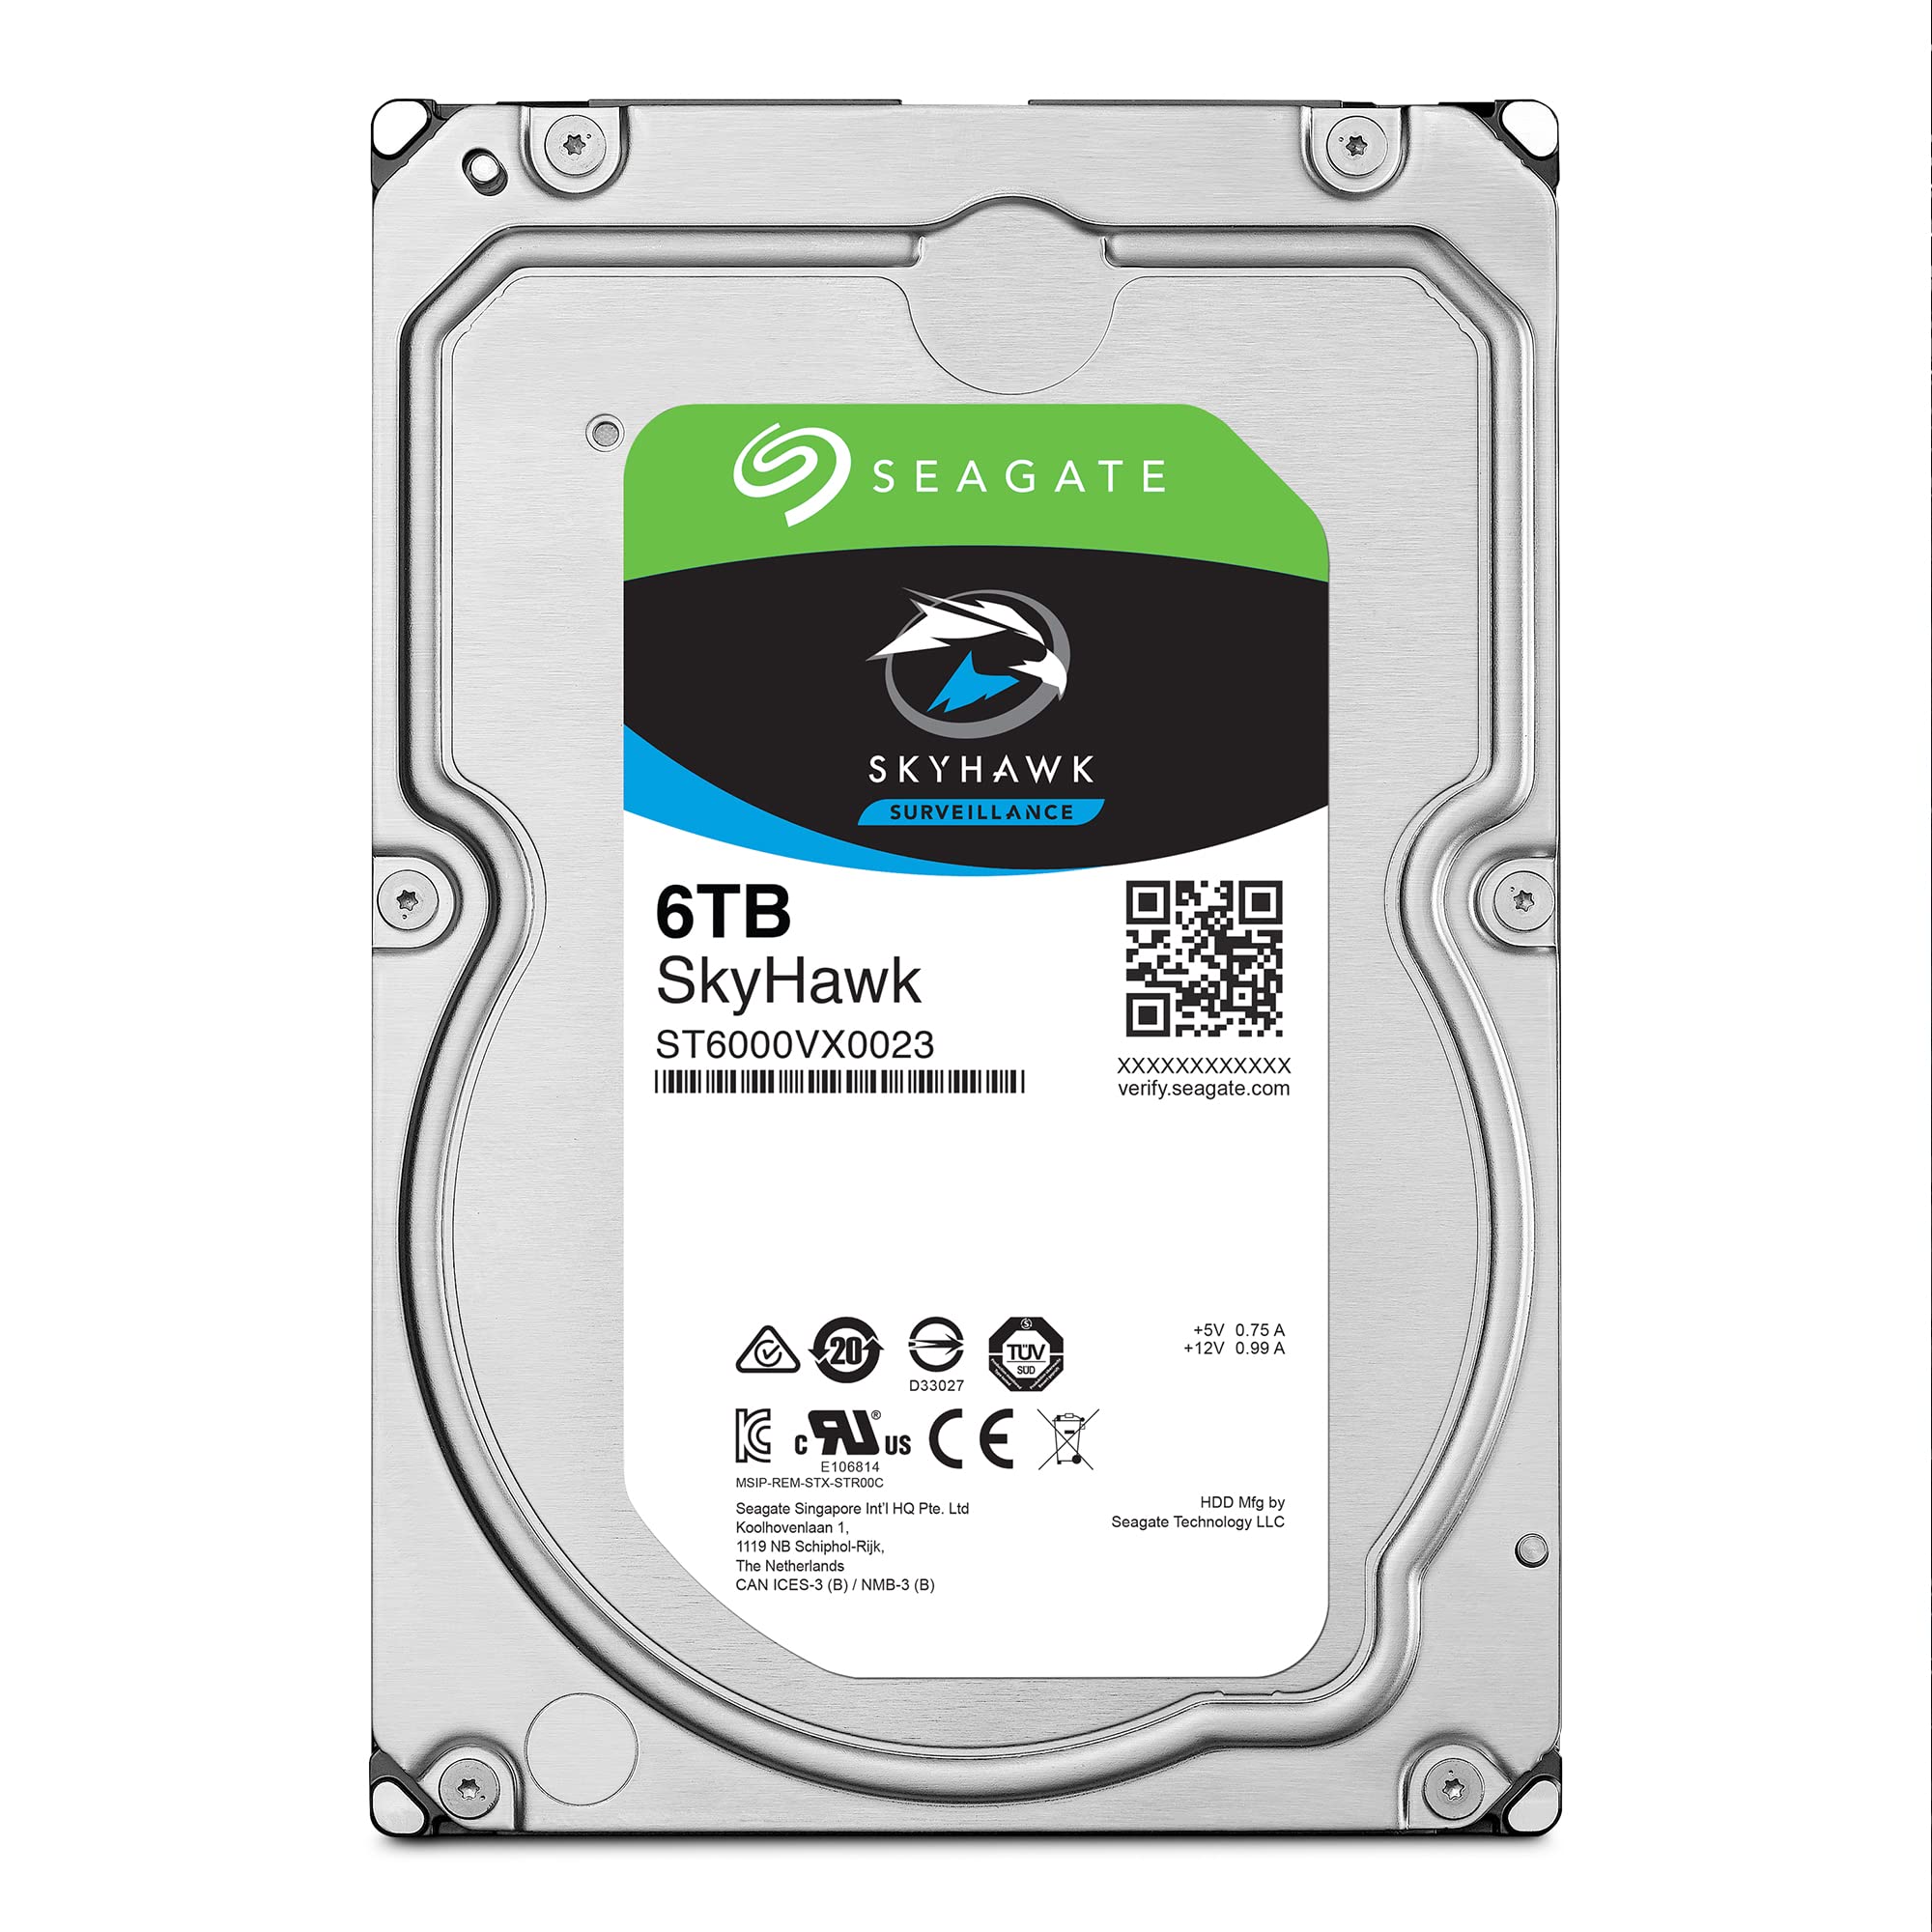 Seagate SkyHawk 6TB Surveillance Internal Hard Drive HDD – 3.5 Inch SATA 6GB/s 256MB Cache for DVR NVR Security Camera System with Drive Health Management – Frustration Free Packaging (ST6000VX001)